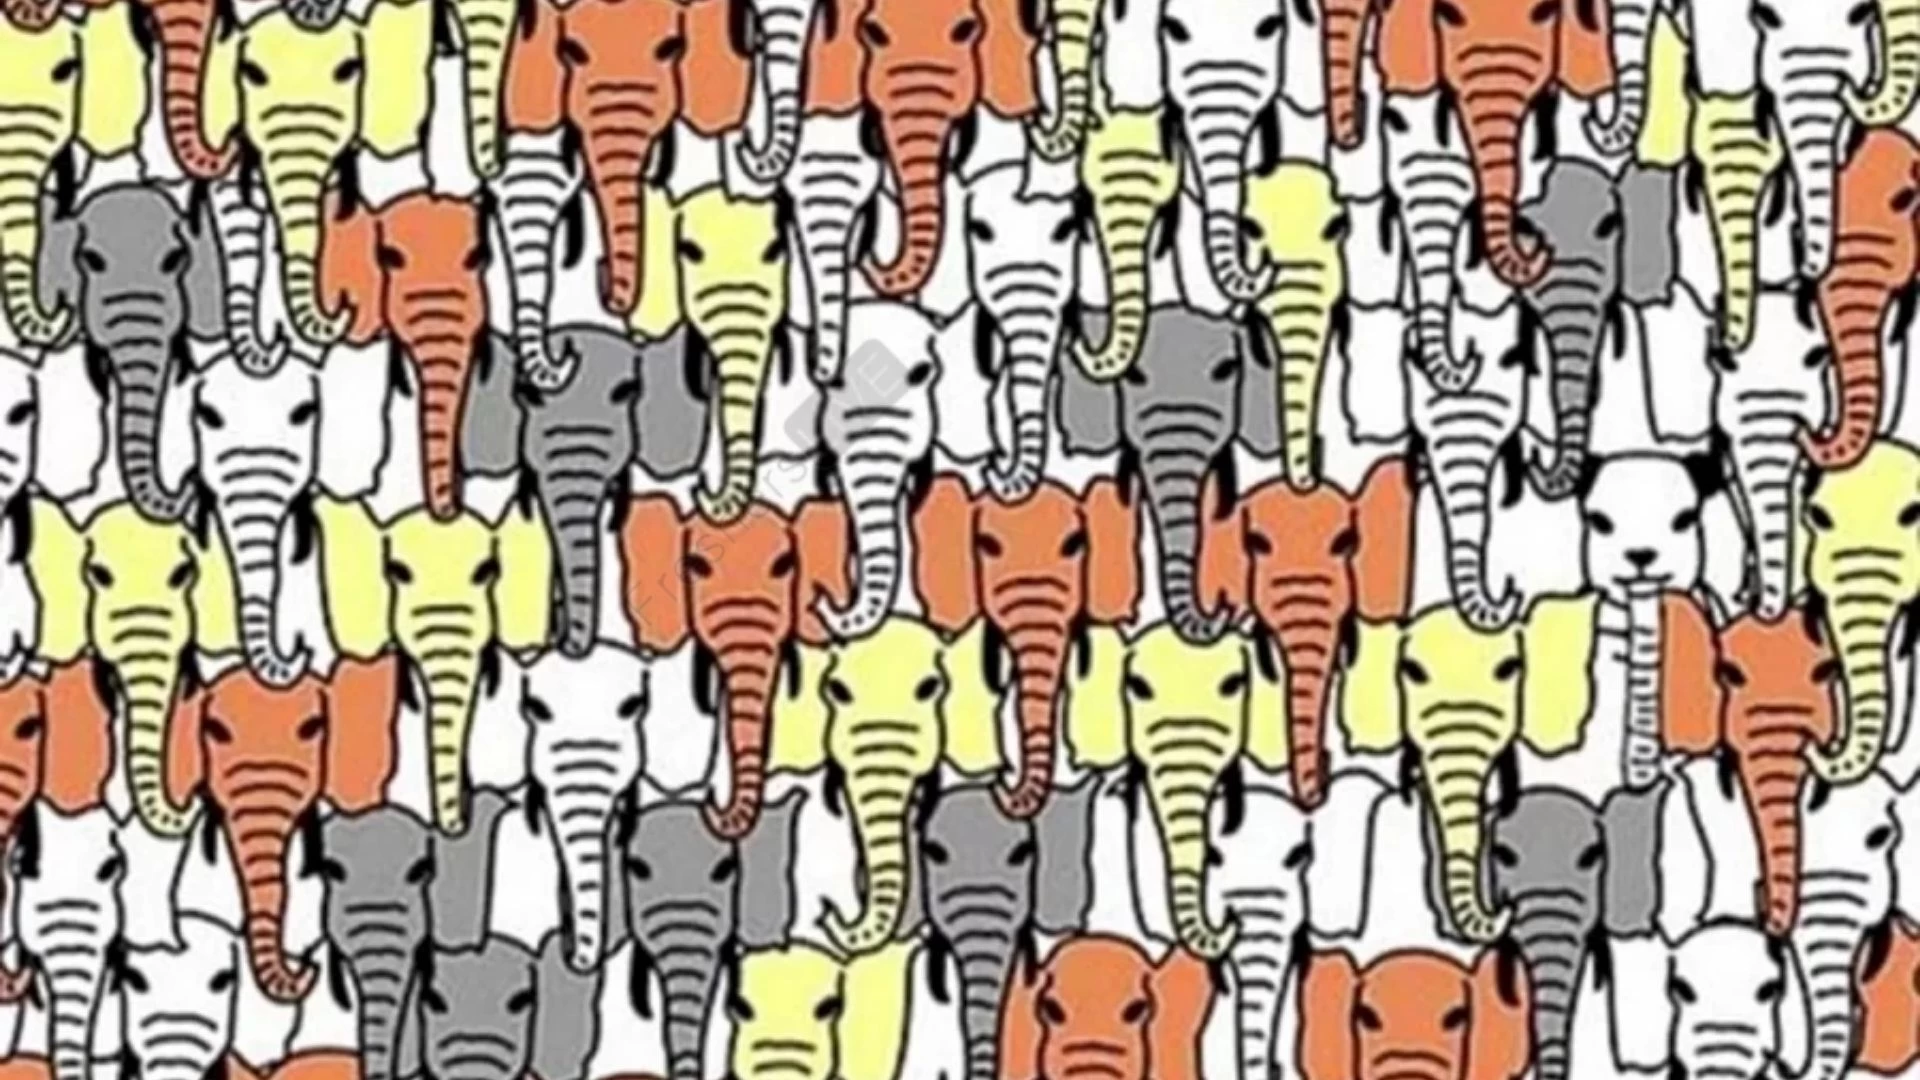 You Have Only 10 Seconds To Find The Panda Among These Elephants. Your Time Starts Now!